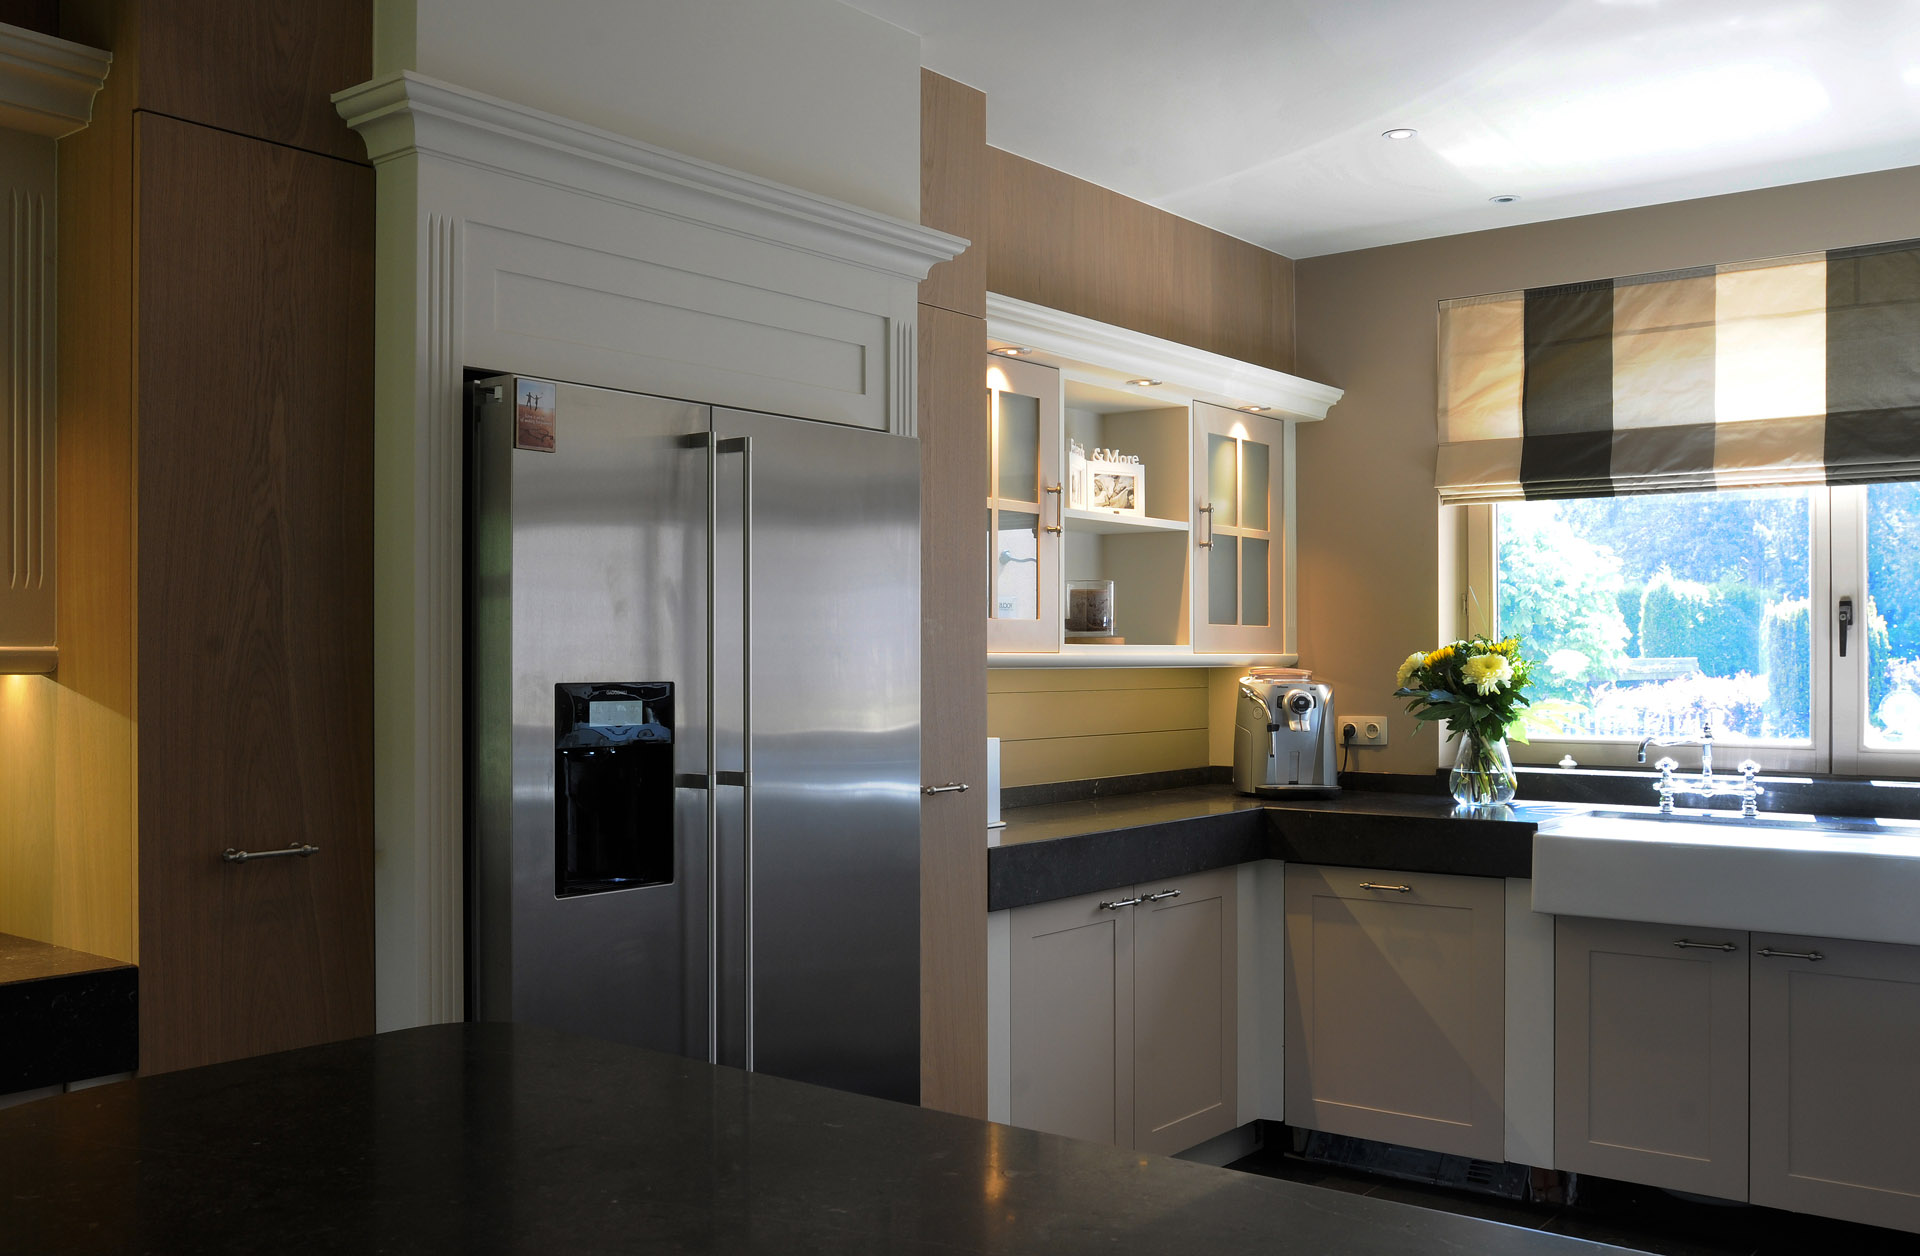 The most beautiful kitchens - Marcotte Style